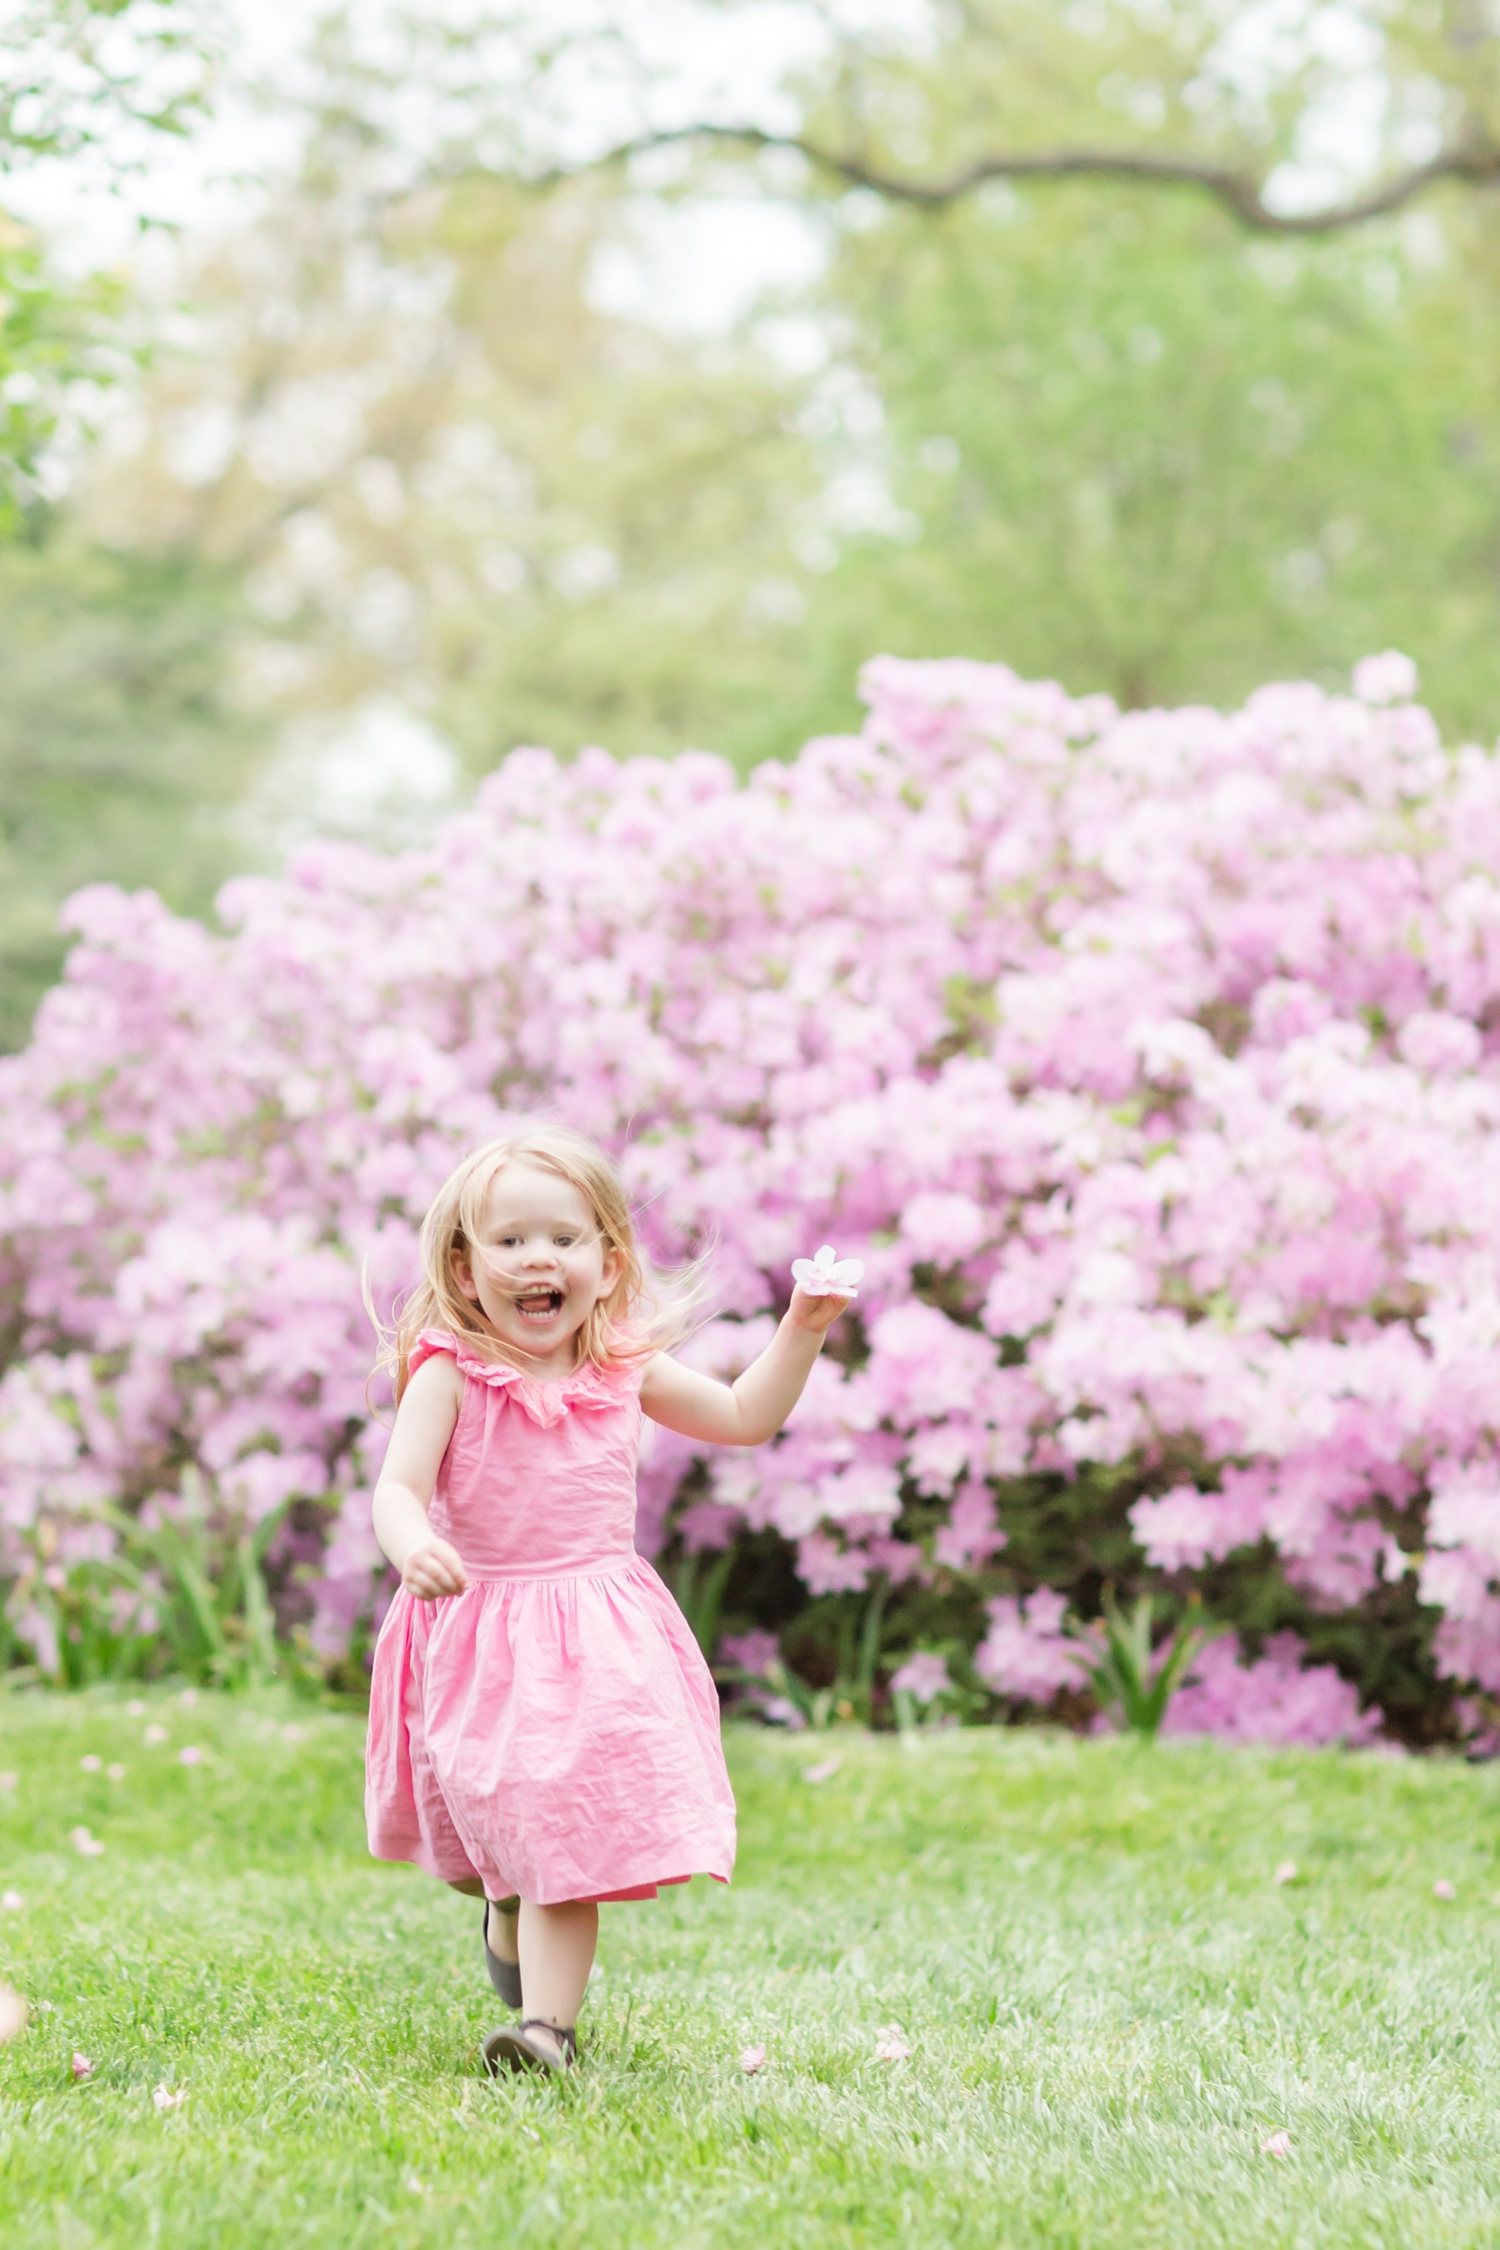  Running to pick flowers for everyone! 